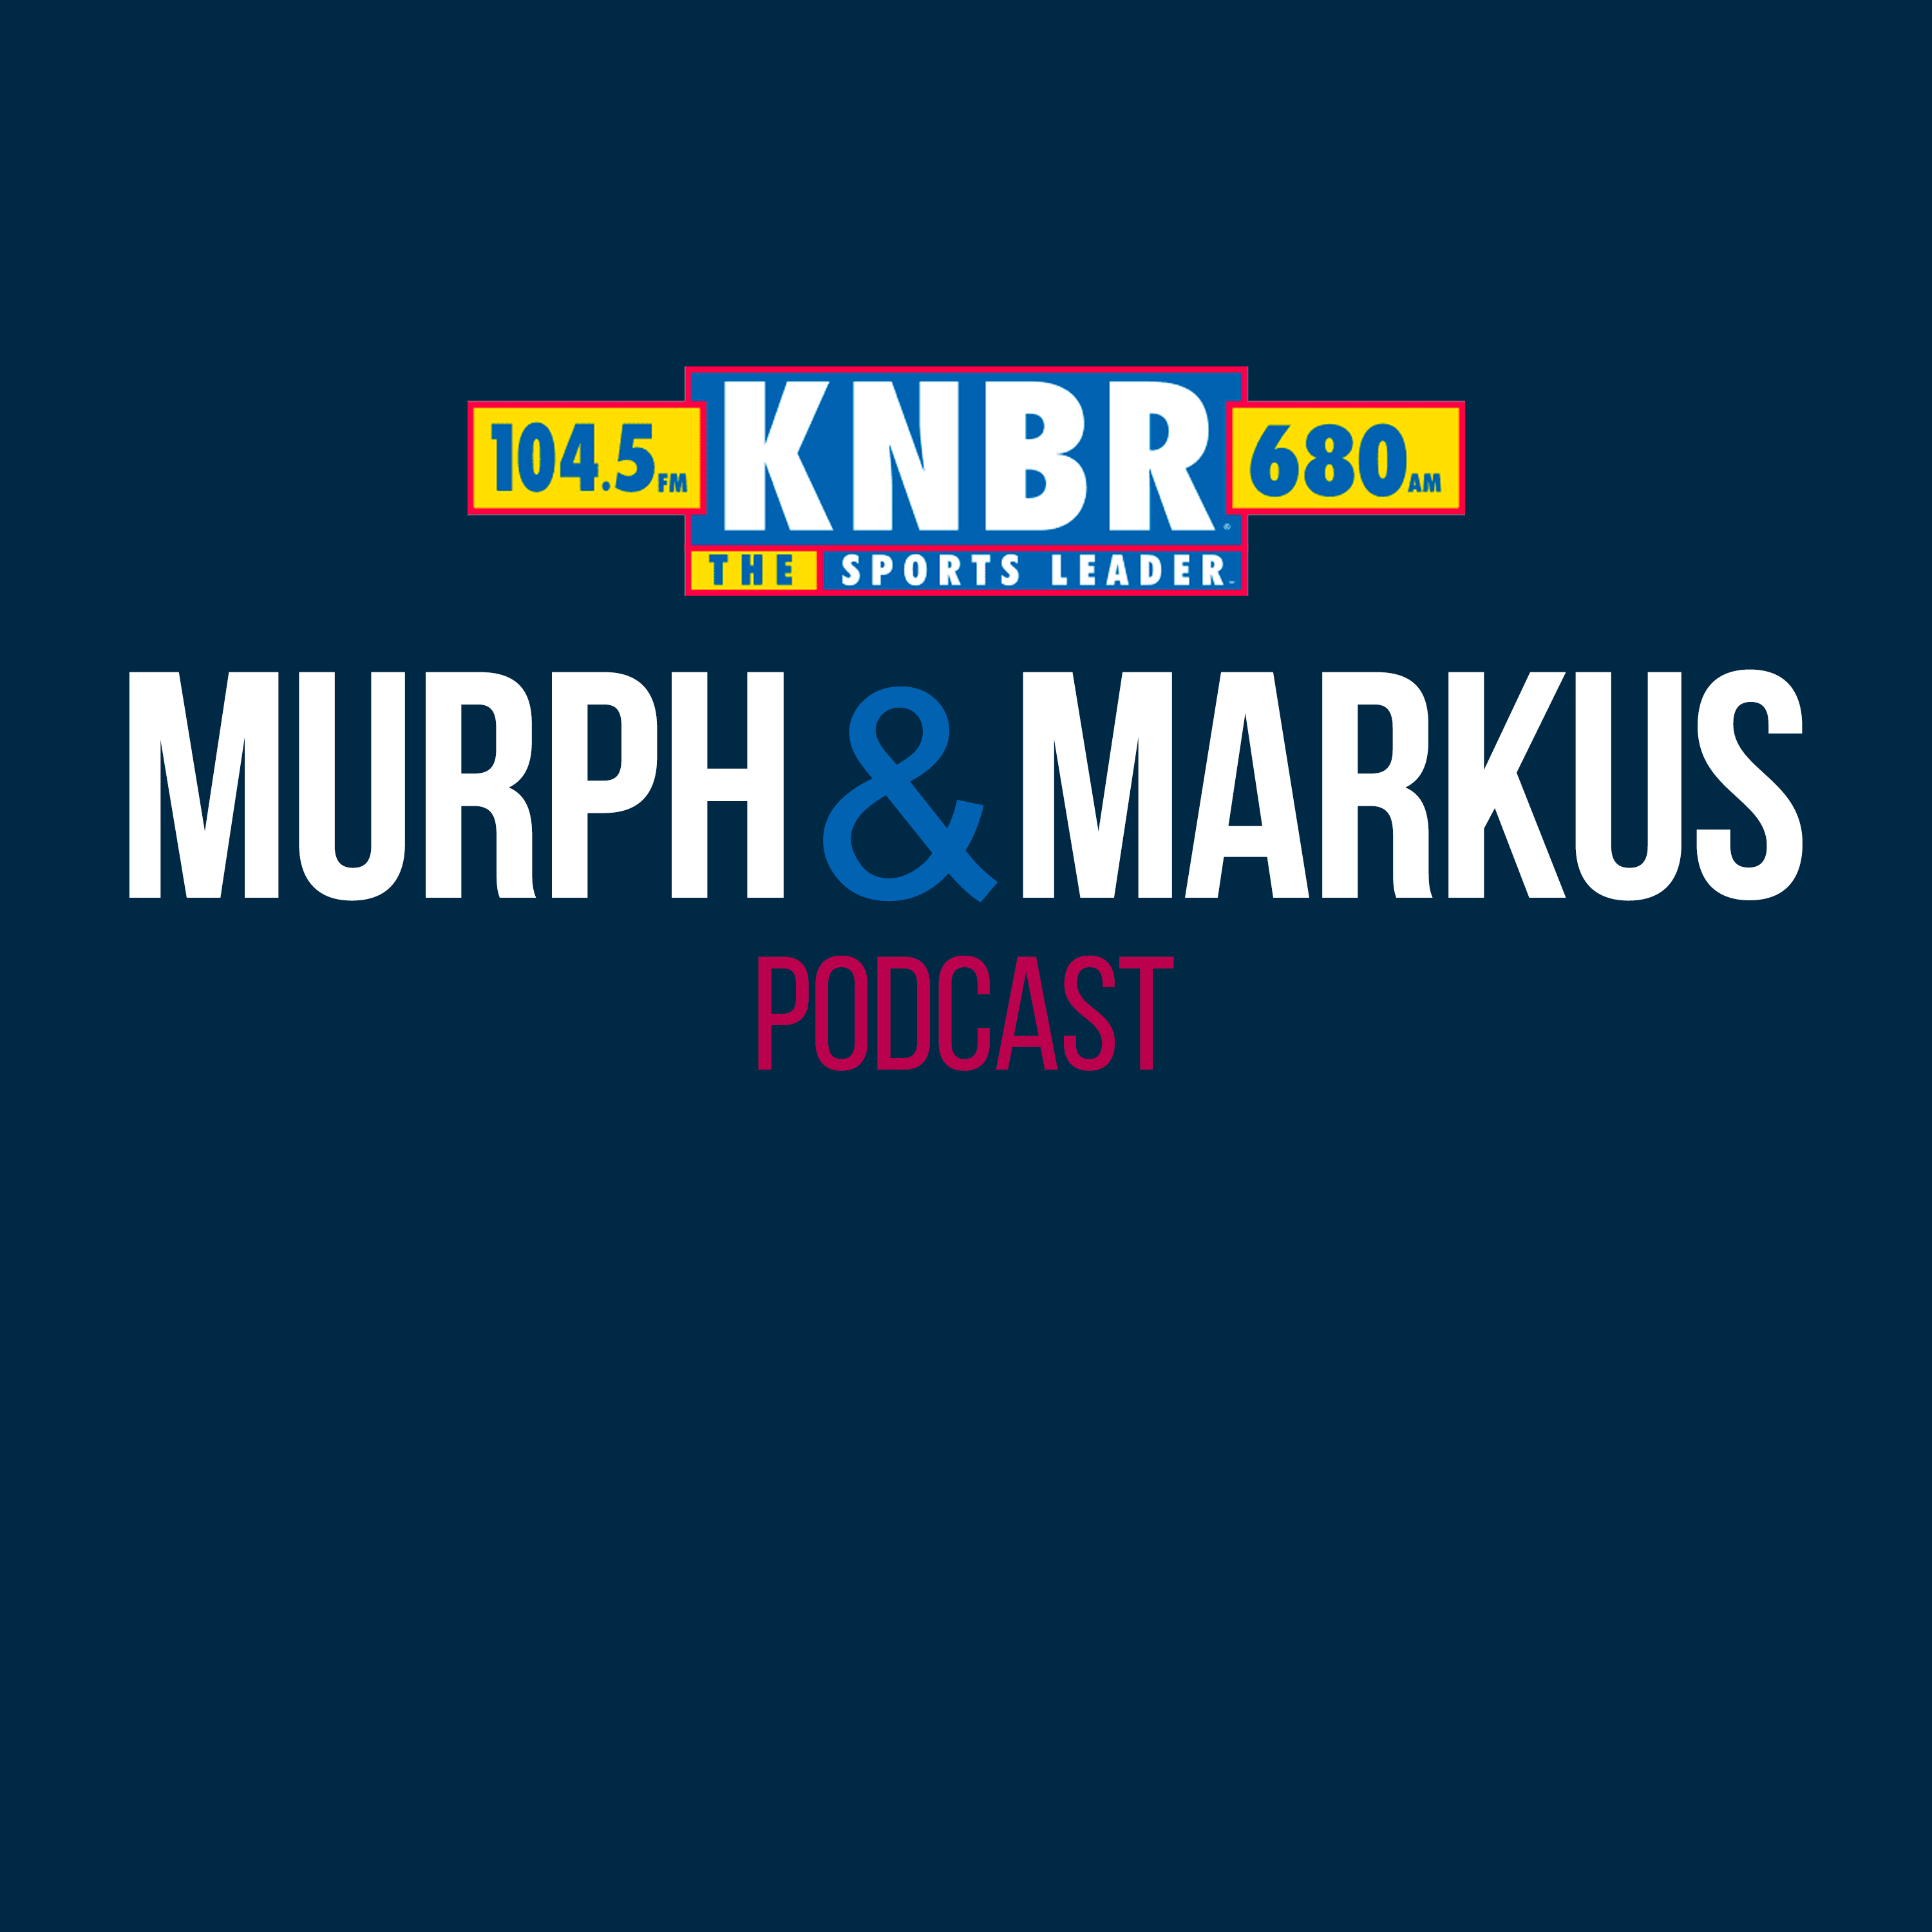 5-22 Hour 1: Murph & Markus react to the Giants blowing a 4-run lead in Pittsburg, discuss who deserves the blame, and hear some of Nick Bosa's comments about the upcoming 49ers season